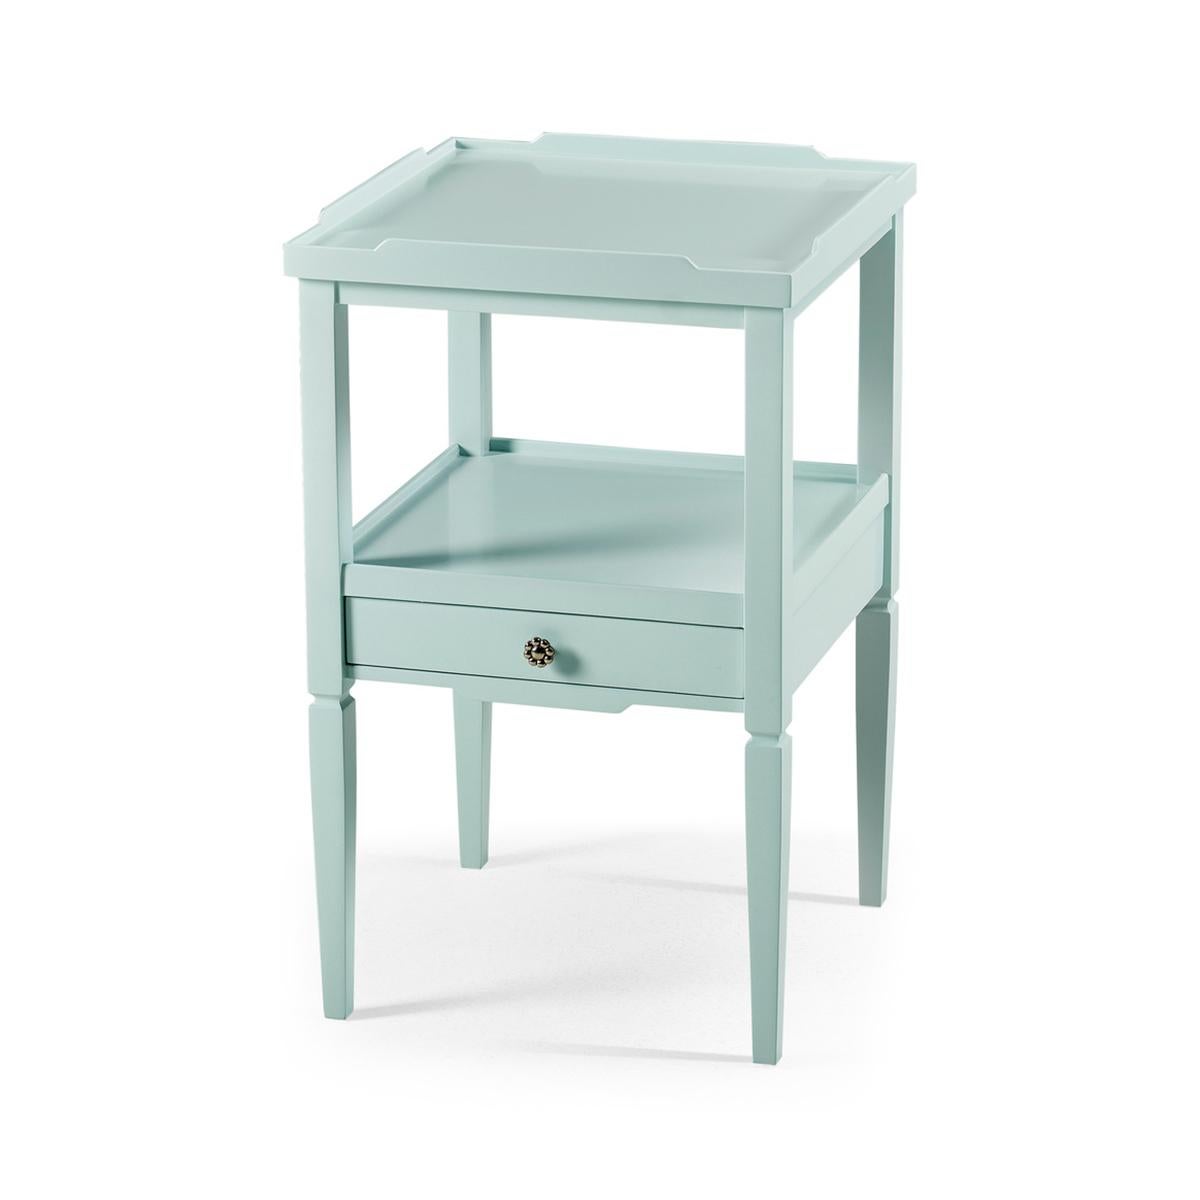 Country painted two tier end table, with a galleried top and a lower drawer shelf lined with a blue and white print. Finished in Palladian Blue with custom cast hardware and square tapered legs.

Dimensions: 16